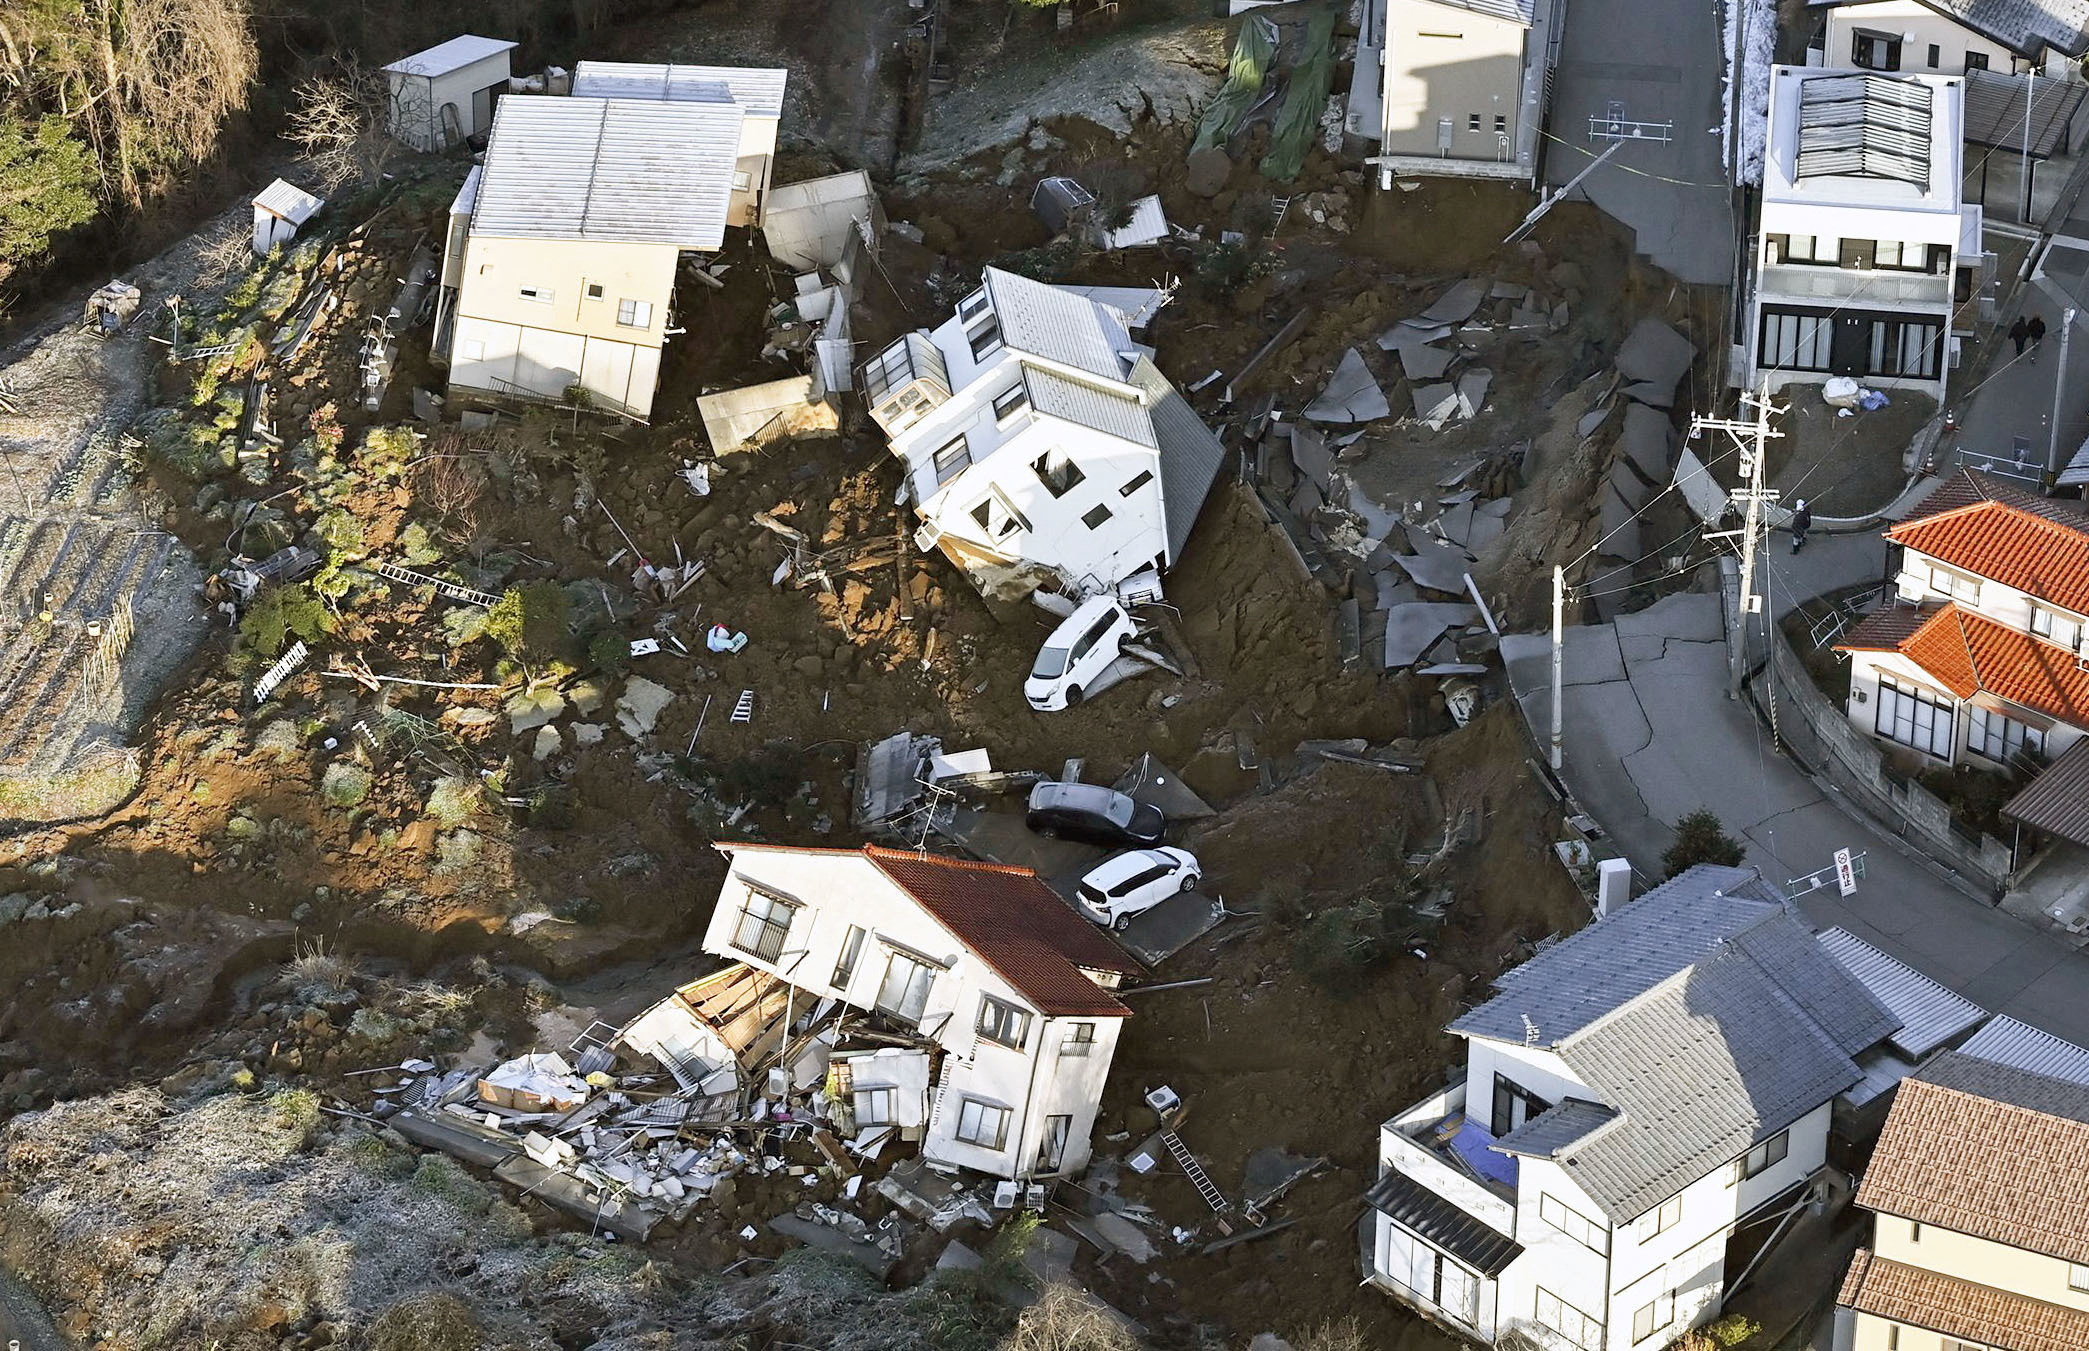 An aerial view shows collapsed houses, cars and roads caused by an earthquake in Kanazawa